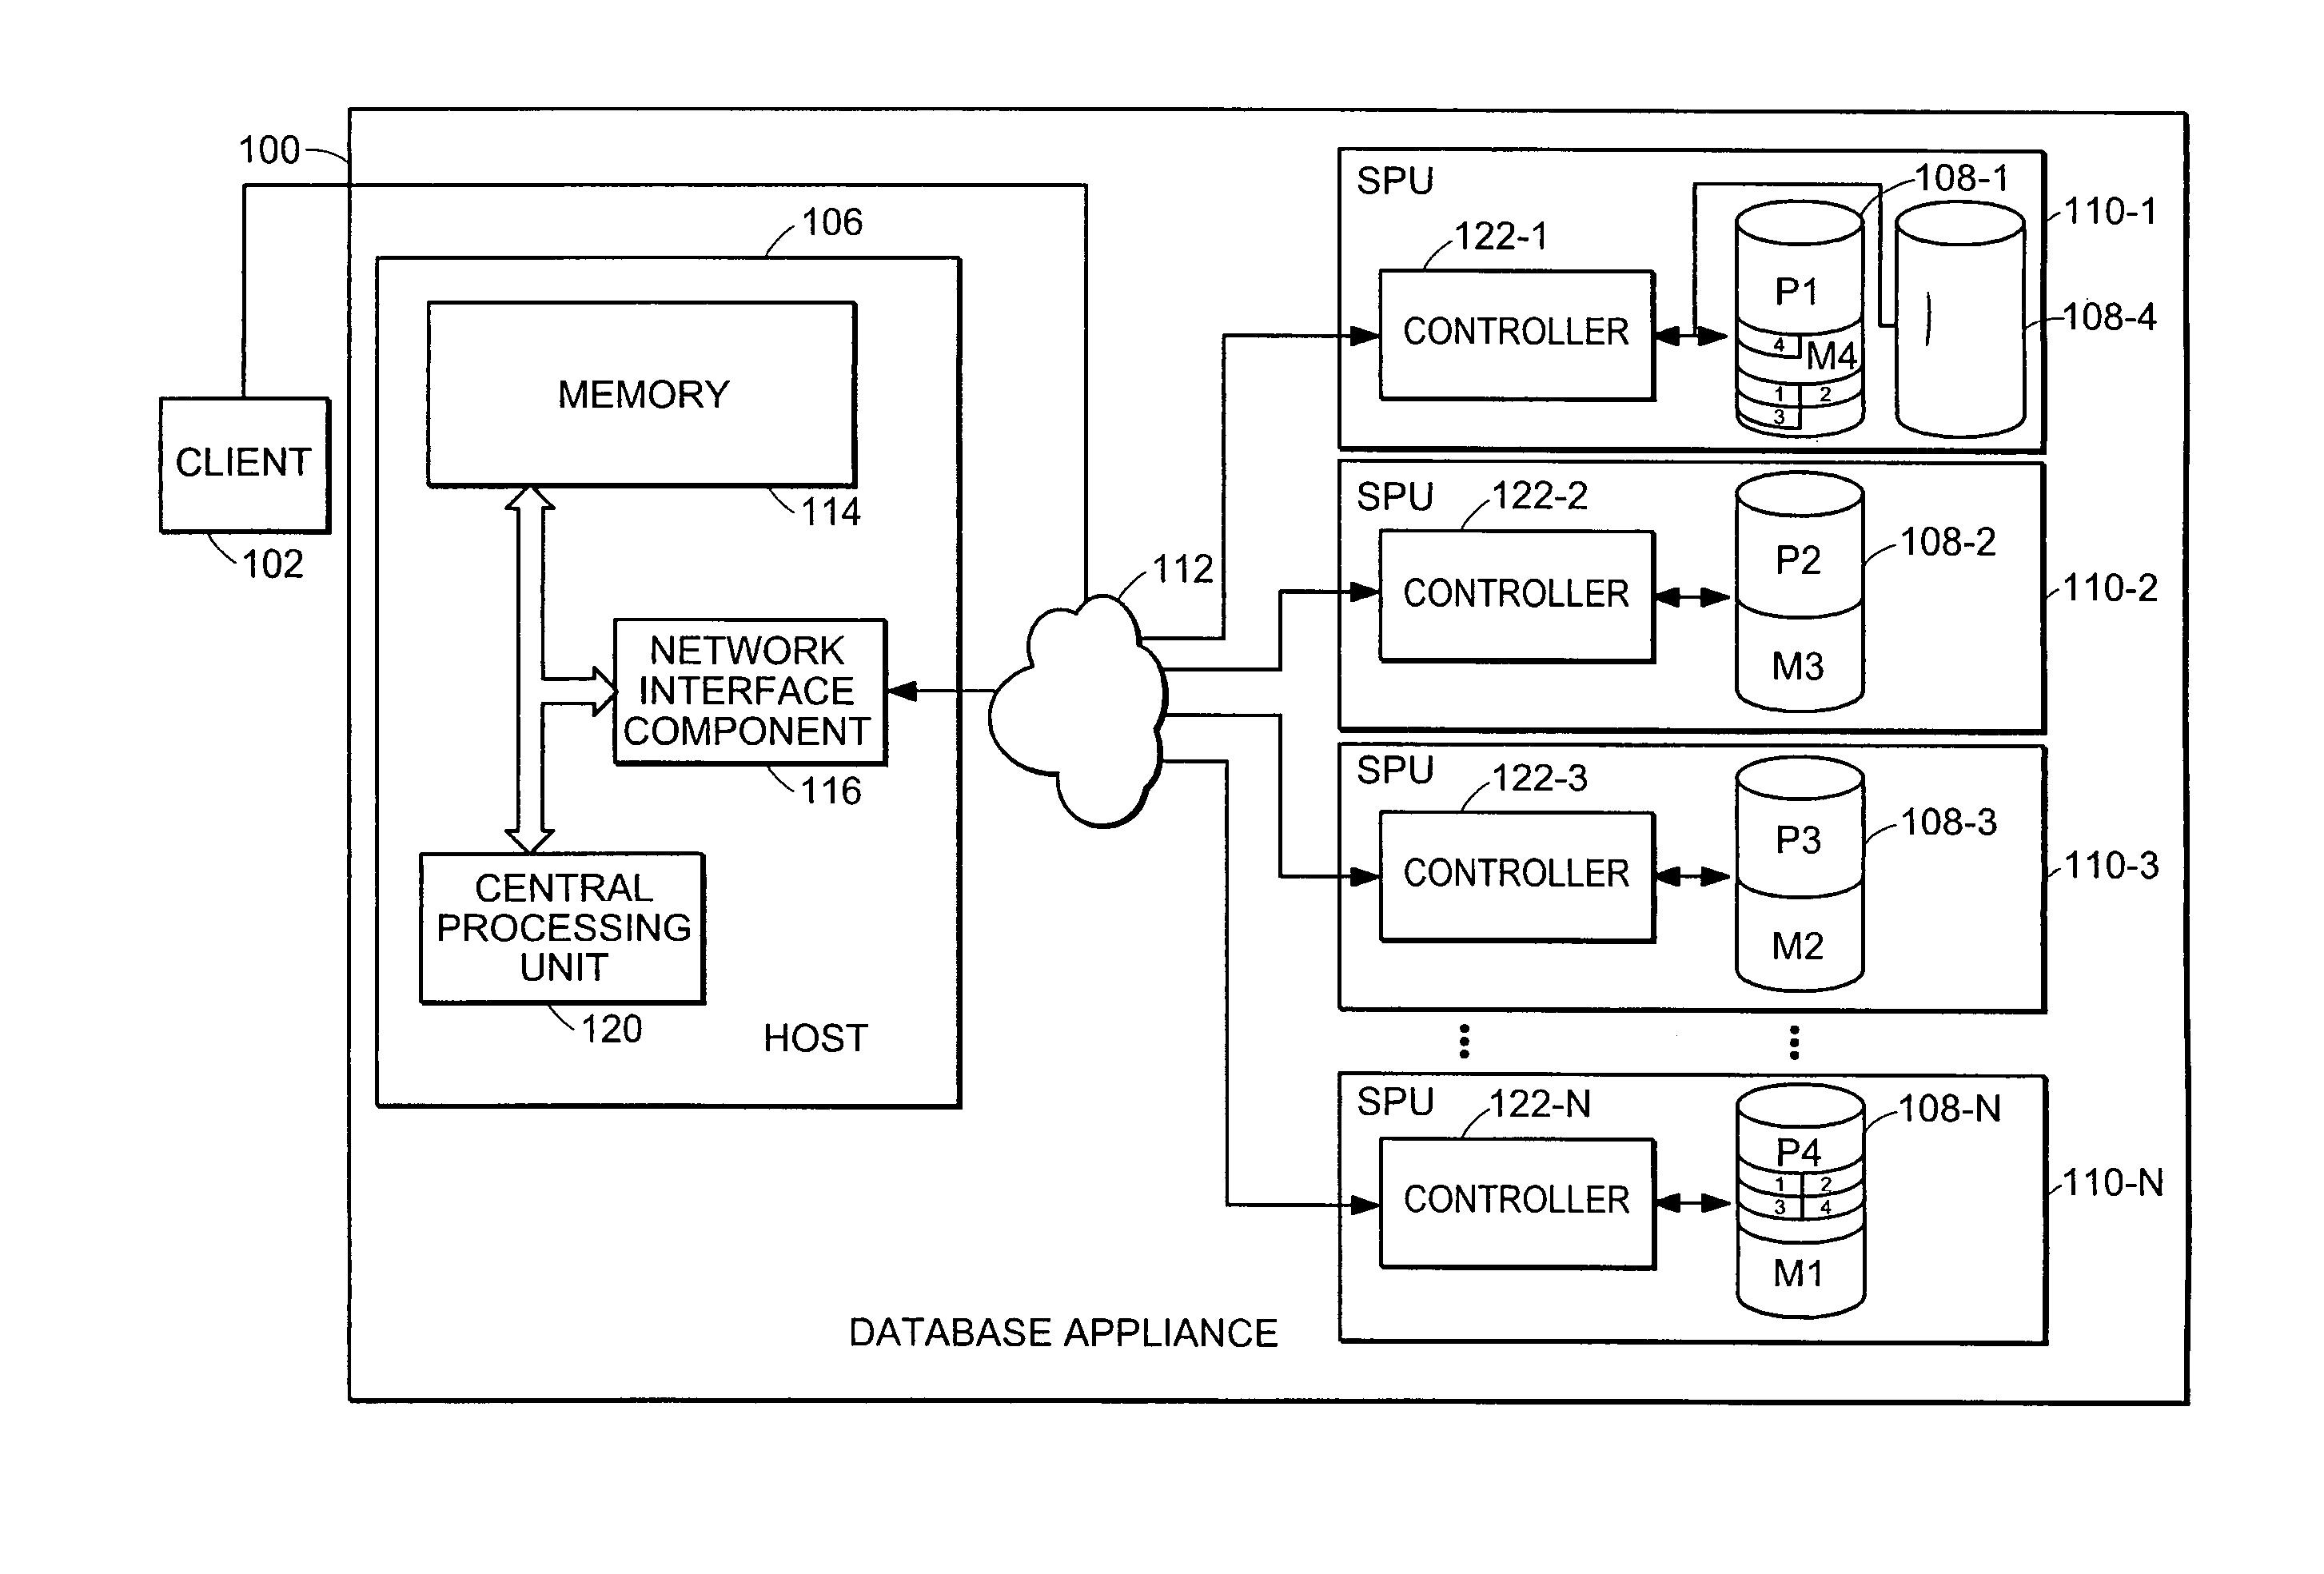 Disk mirror architecture for database appliance